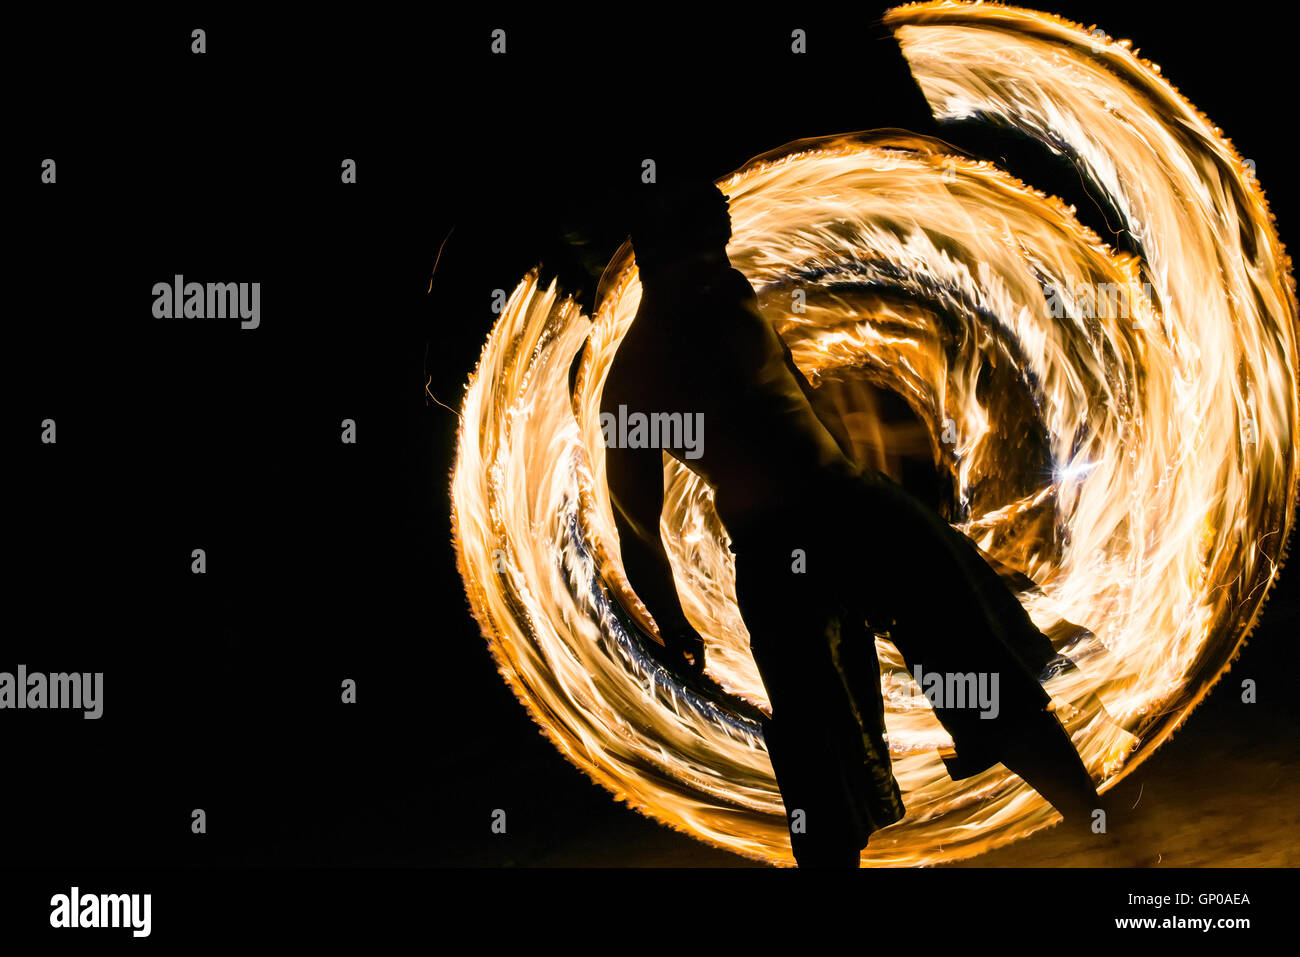 a man showing fire dancing flaming trails. Stock Photo